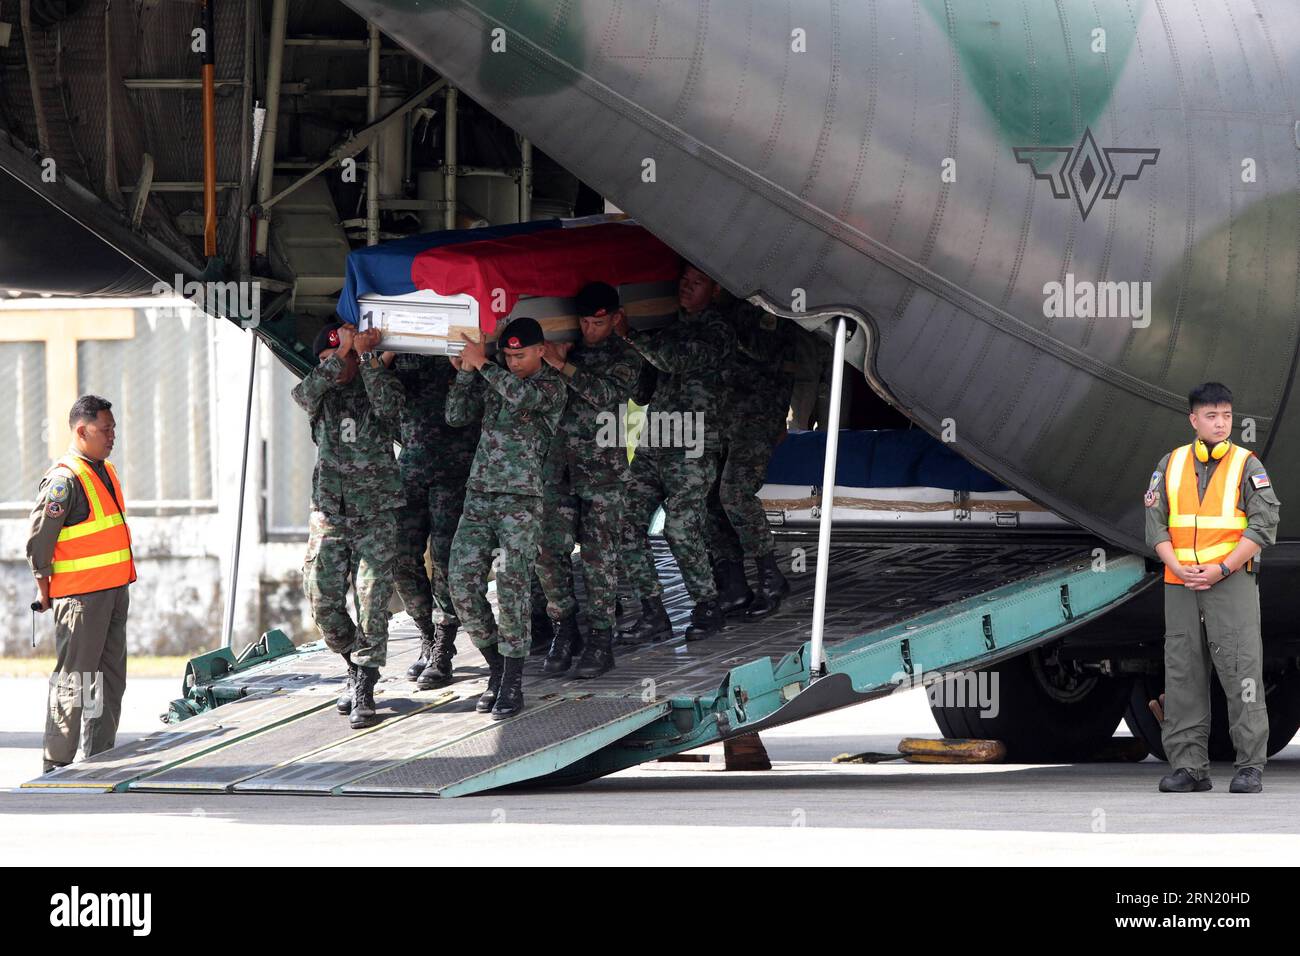 (150129) -- PASAY CITY, Jan. 29, 2015 -- Members of the Philippine National Police Special Action Force (PNP-SAF) carry the casket of their fallen comrades at the Villamor Air Base in Pasay City, the Philippines, Jan. 29, 2015. Forty-four members of the PNP-SAF were killed allegedly by Moro Islamic Liberation Front and Bangsamoro Islamic Freedom Fighters members on Jan. 25 in Mamasapano, Maguindanao. ) PHILIPPINES-PASAY CITY-POLICE RouellexUmali PUBLICATIONxNOTxINxCHN   Pasay City Jan 29 2015 Members of The Philippine National Police Special Action Force PNP SAF Carry The casket of their Fall Stock Photo